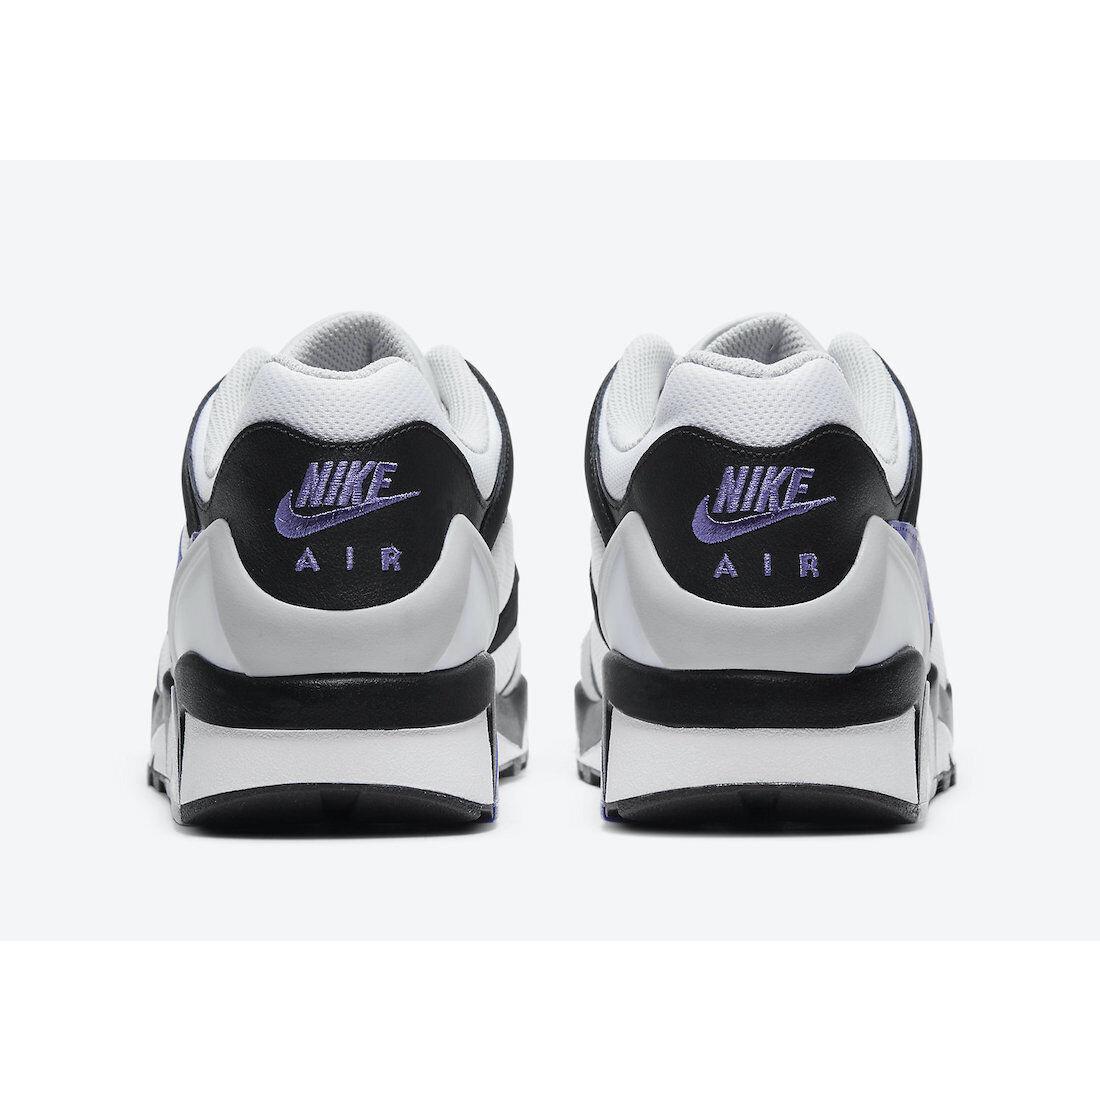 Nike shoes Air Structure Triax - White/Gray/Black 2